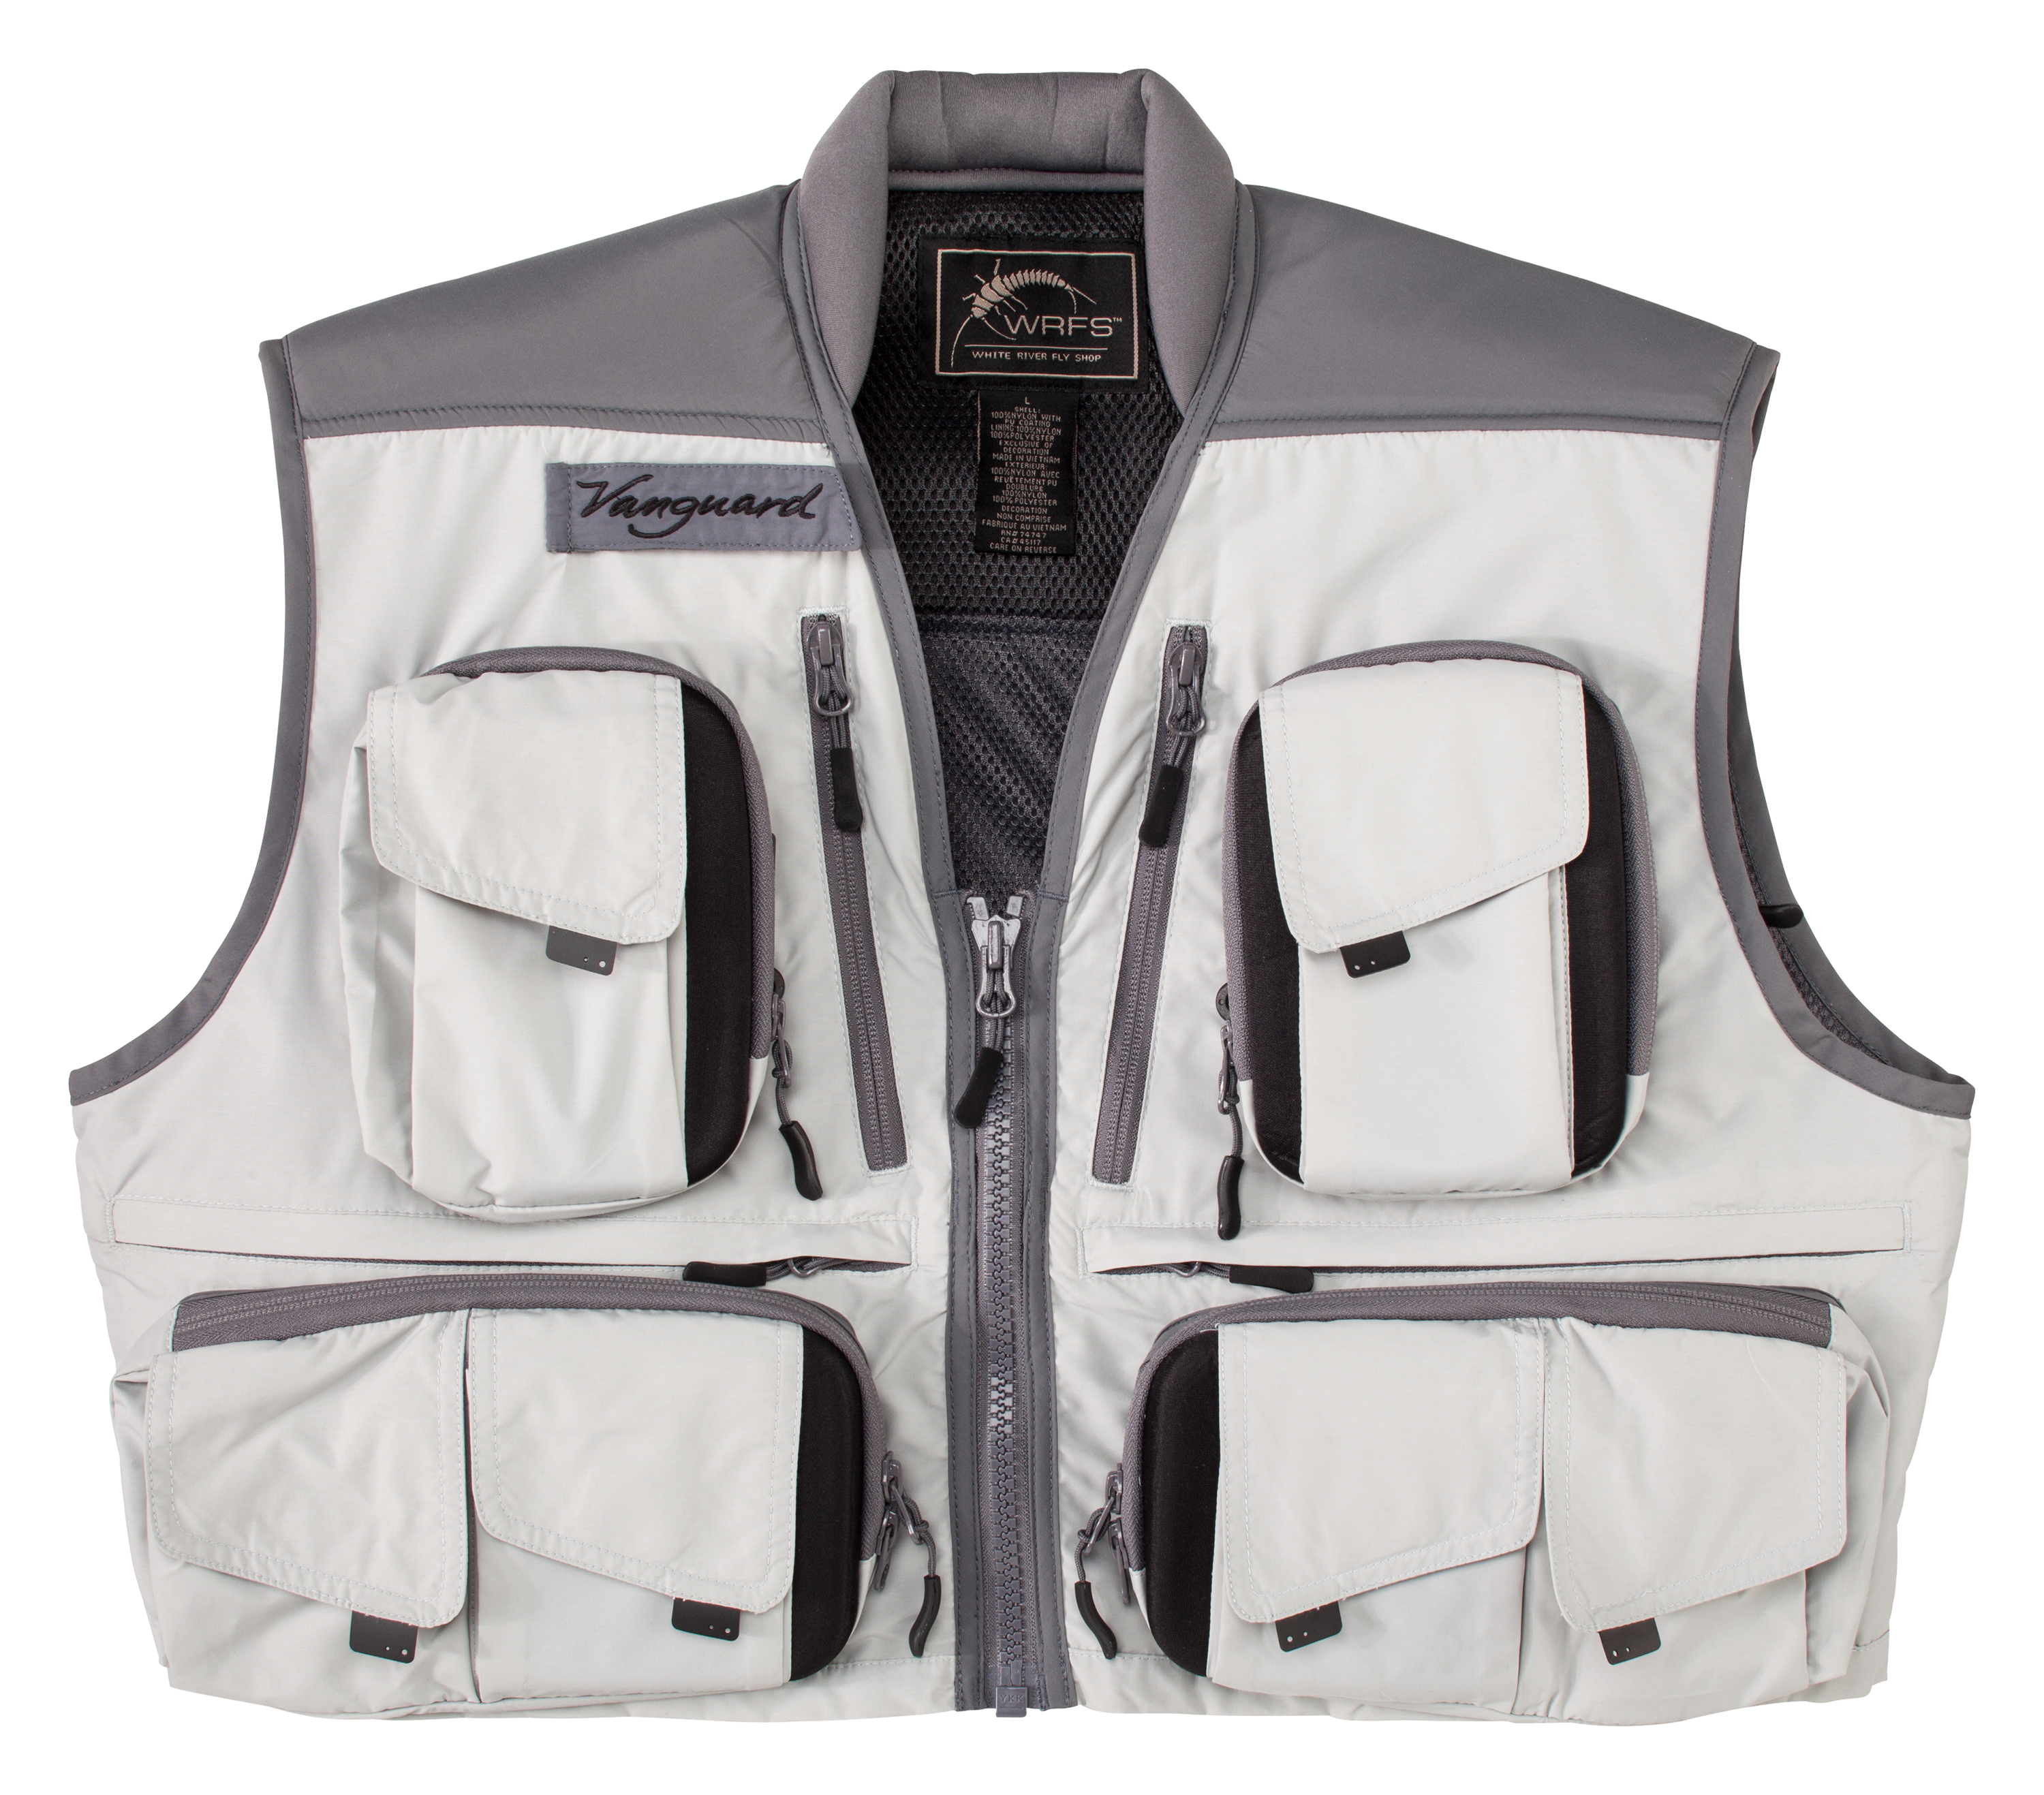 WHITE RIVER FLY Fishing Vest Large $16.99 - PicClick